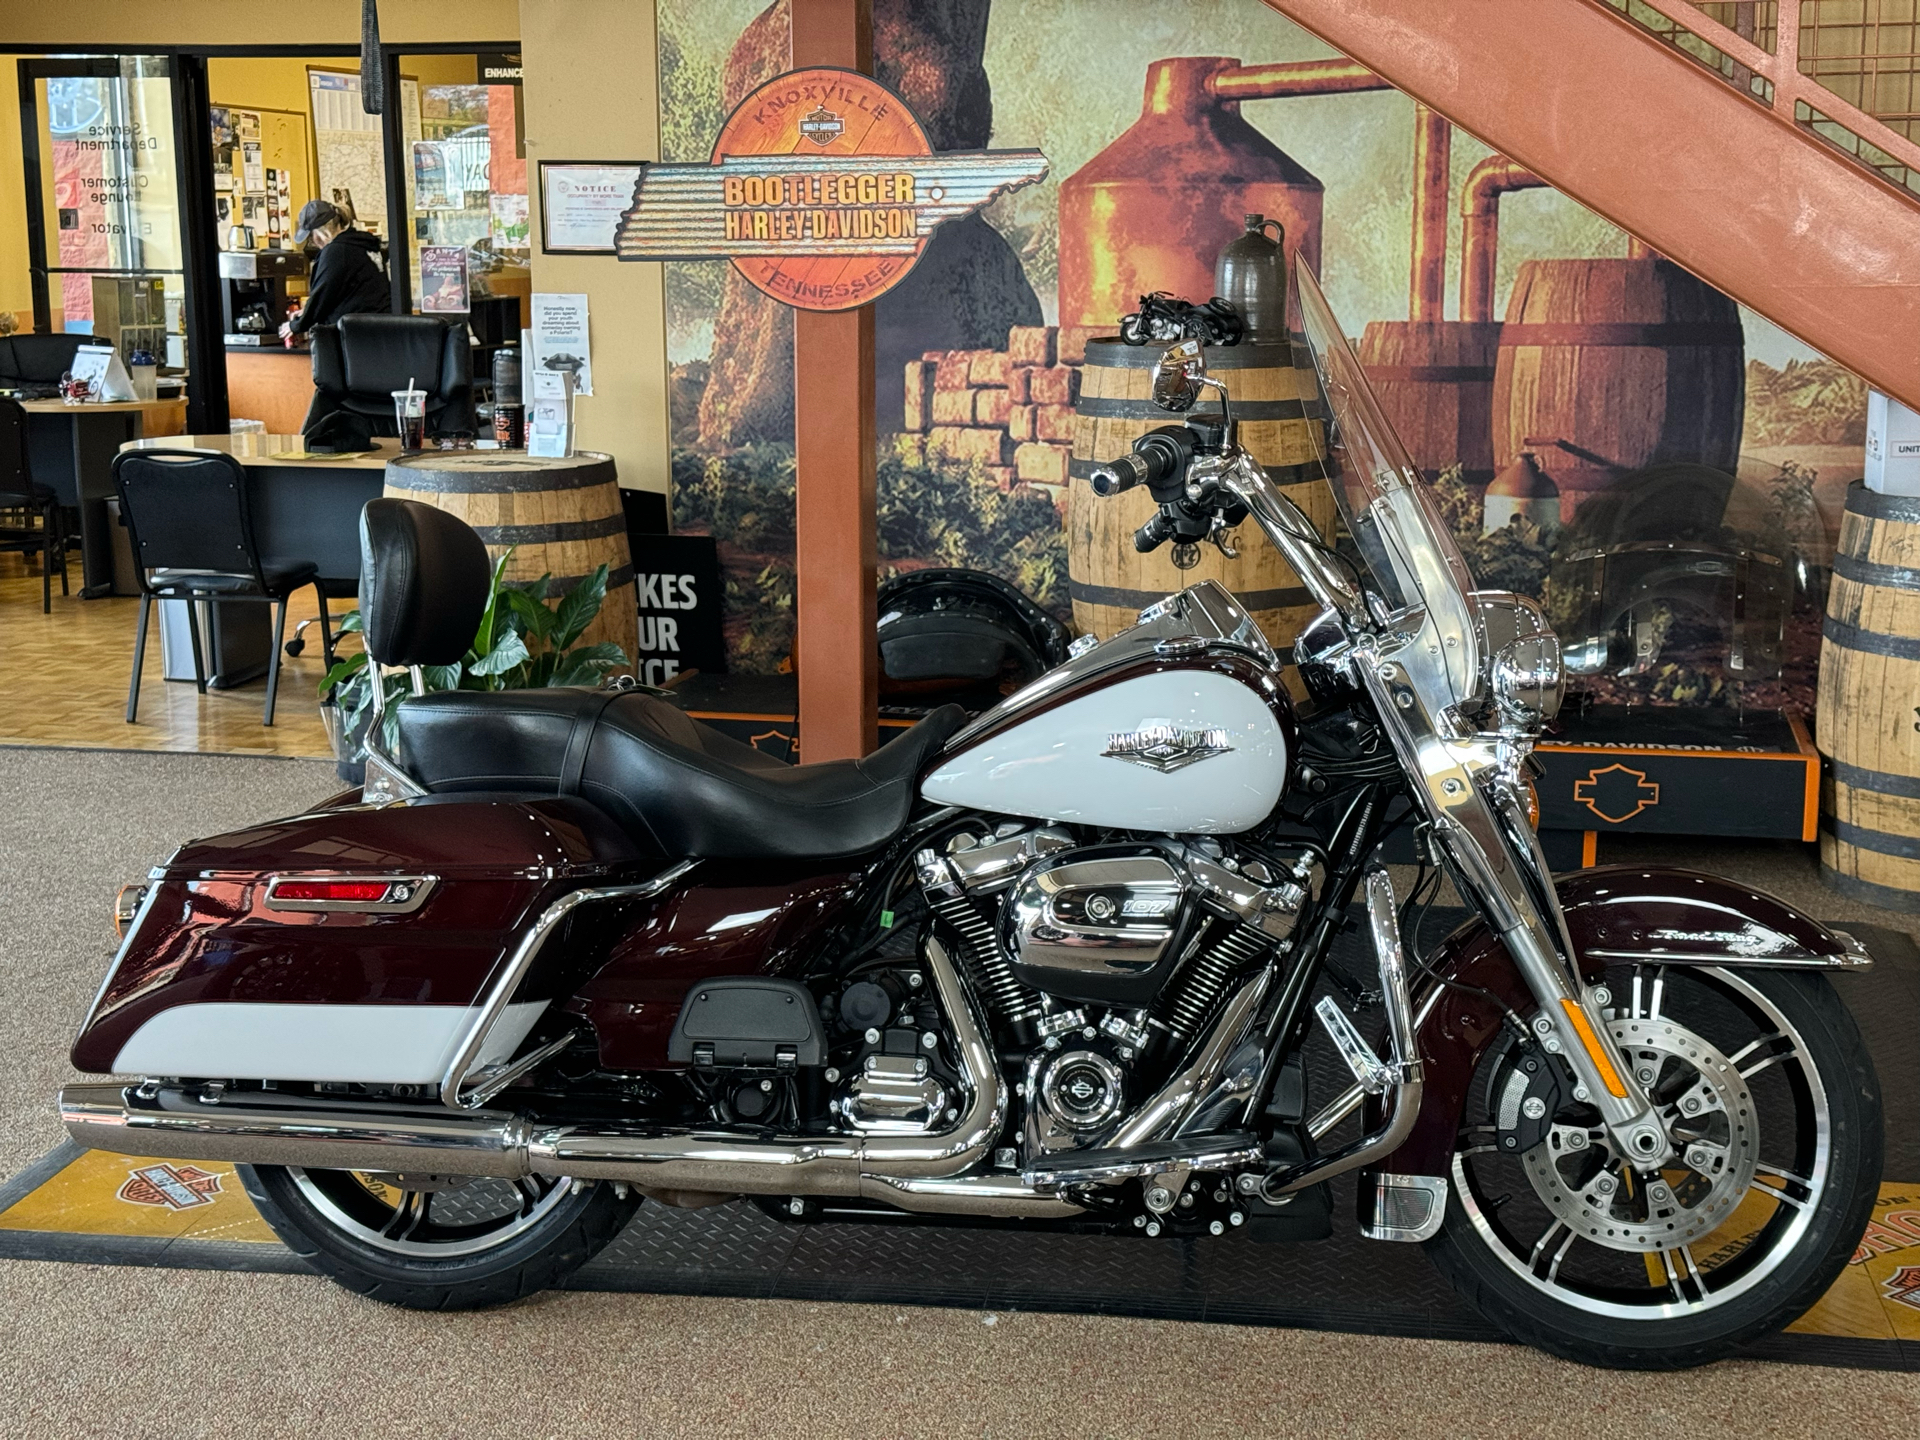 2021 Harley-Davidson Road King® in Knoxville, Tennessee - Photo 1